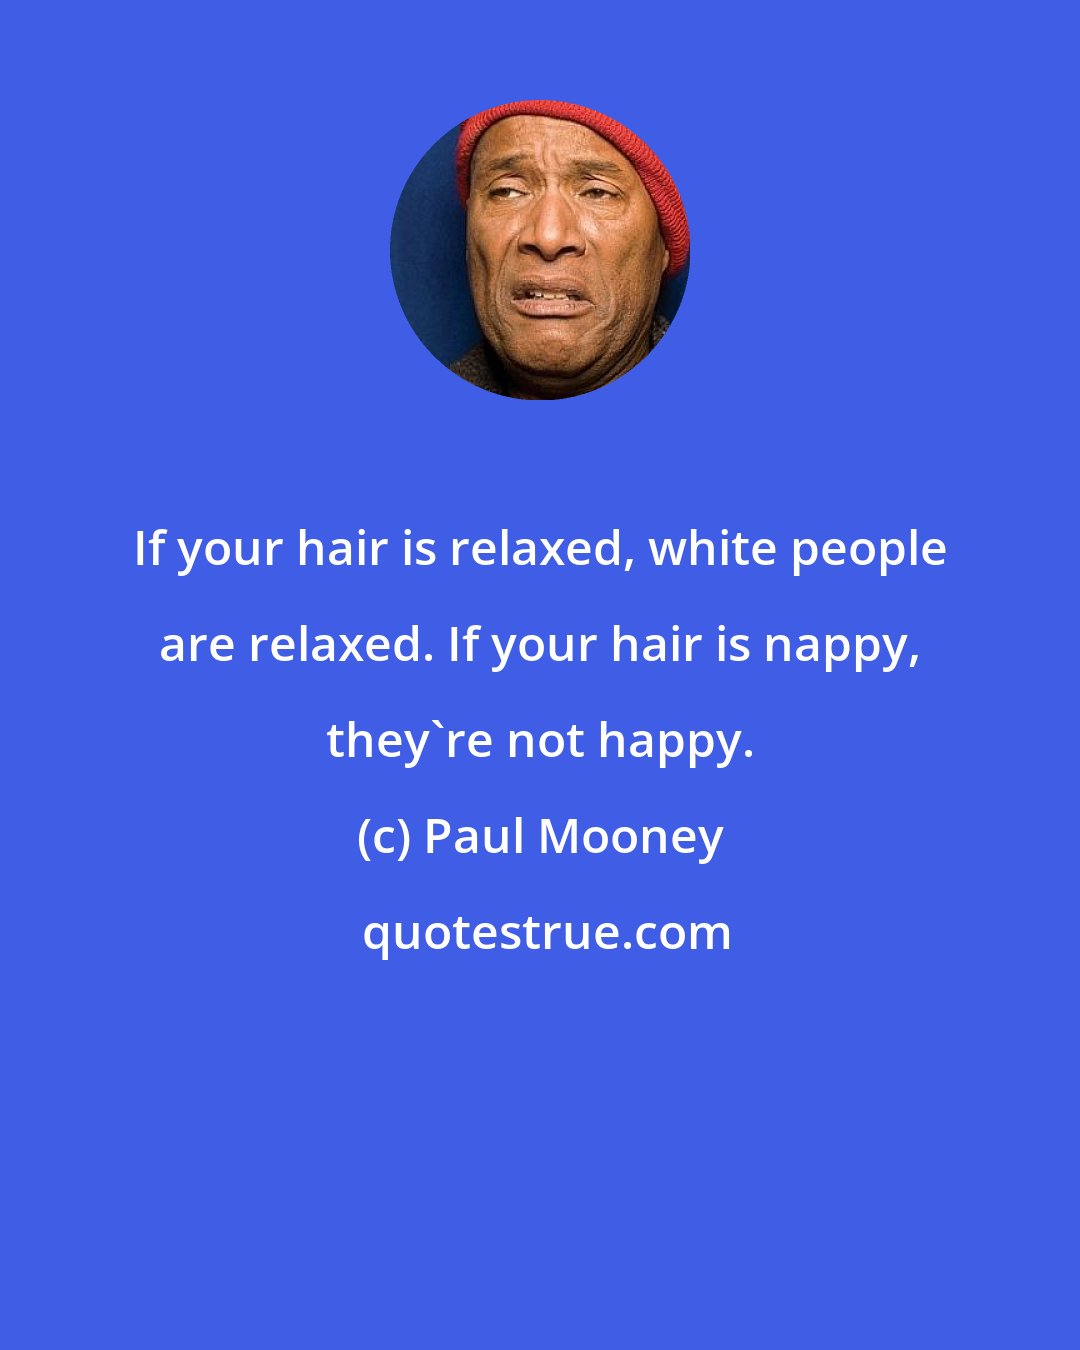 Paul Mooney: If your hair is relaxed, white people are relaxed. If your hair is nappy, they're not happy.